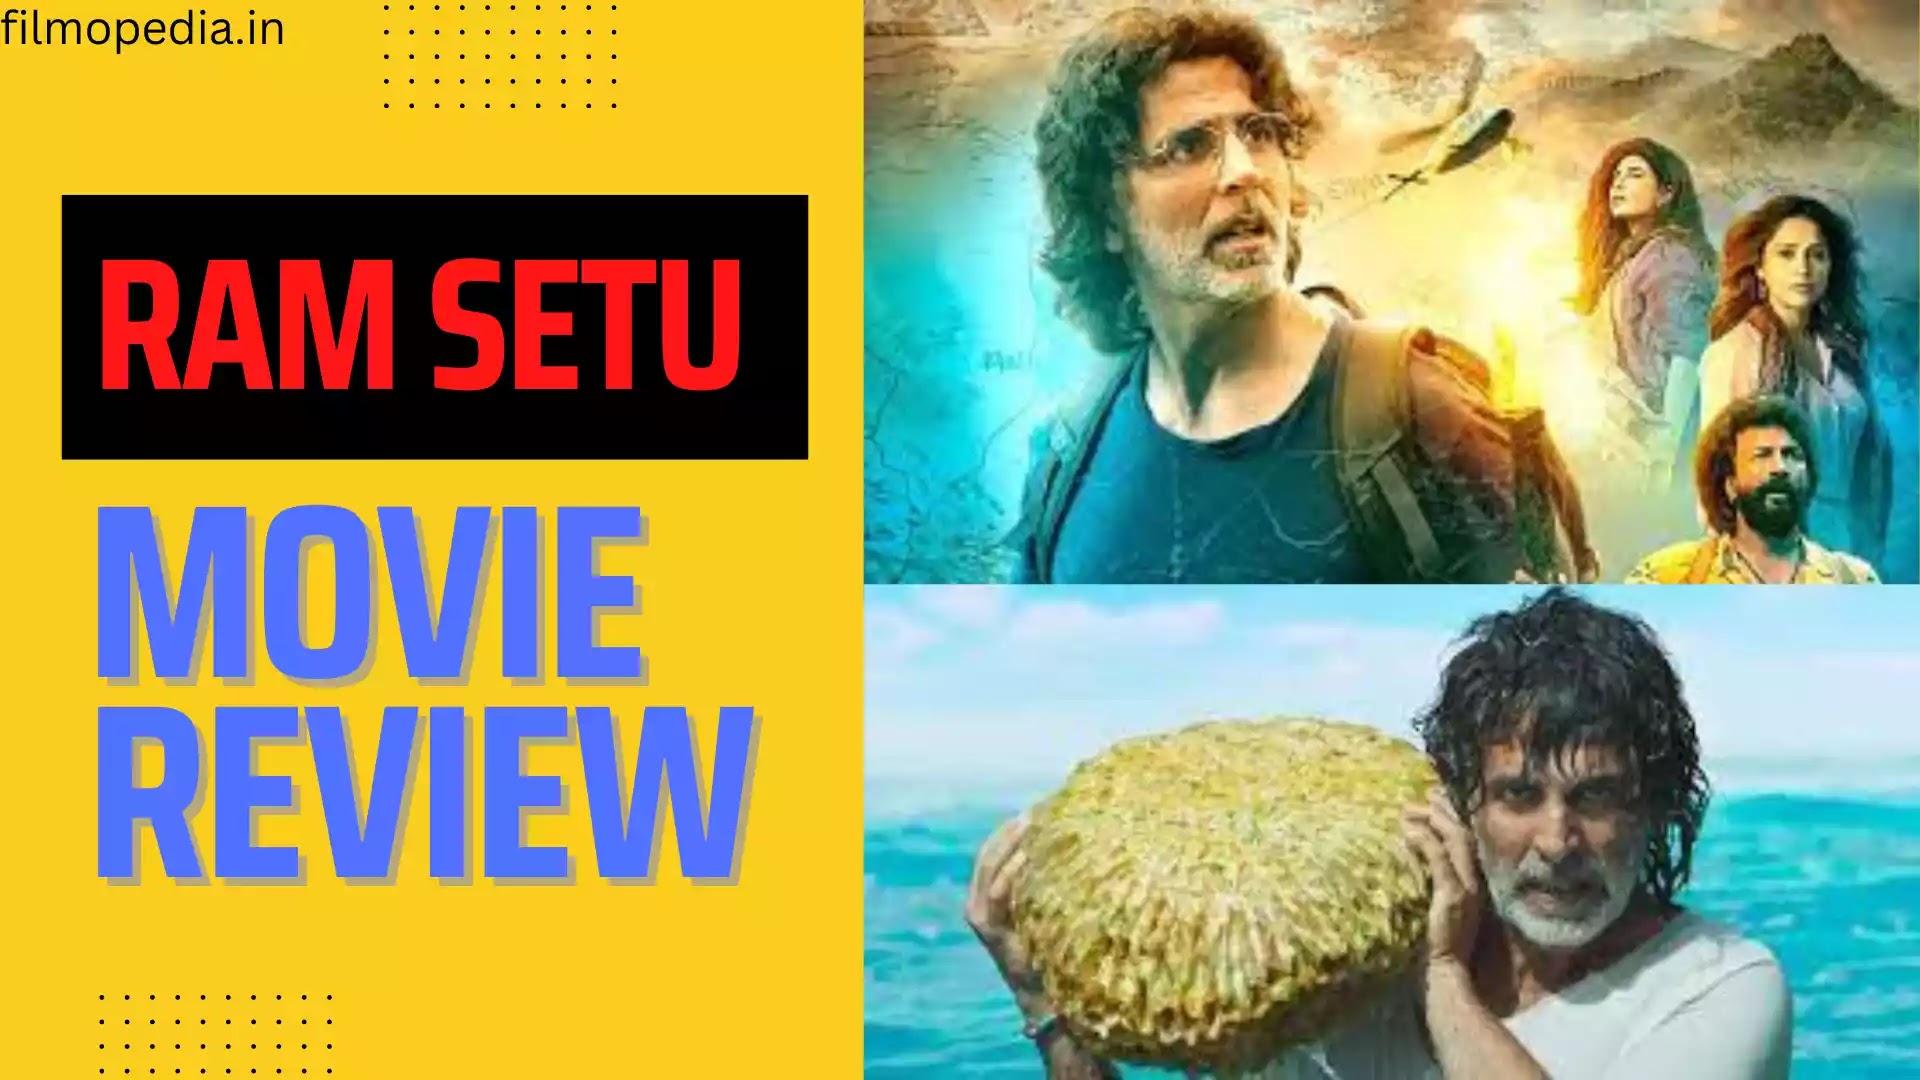 Ram Setu movie Review-Box Office Collection,Hit or Flop